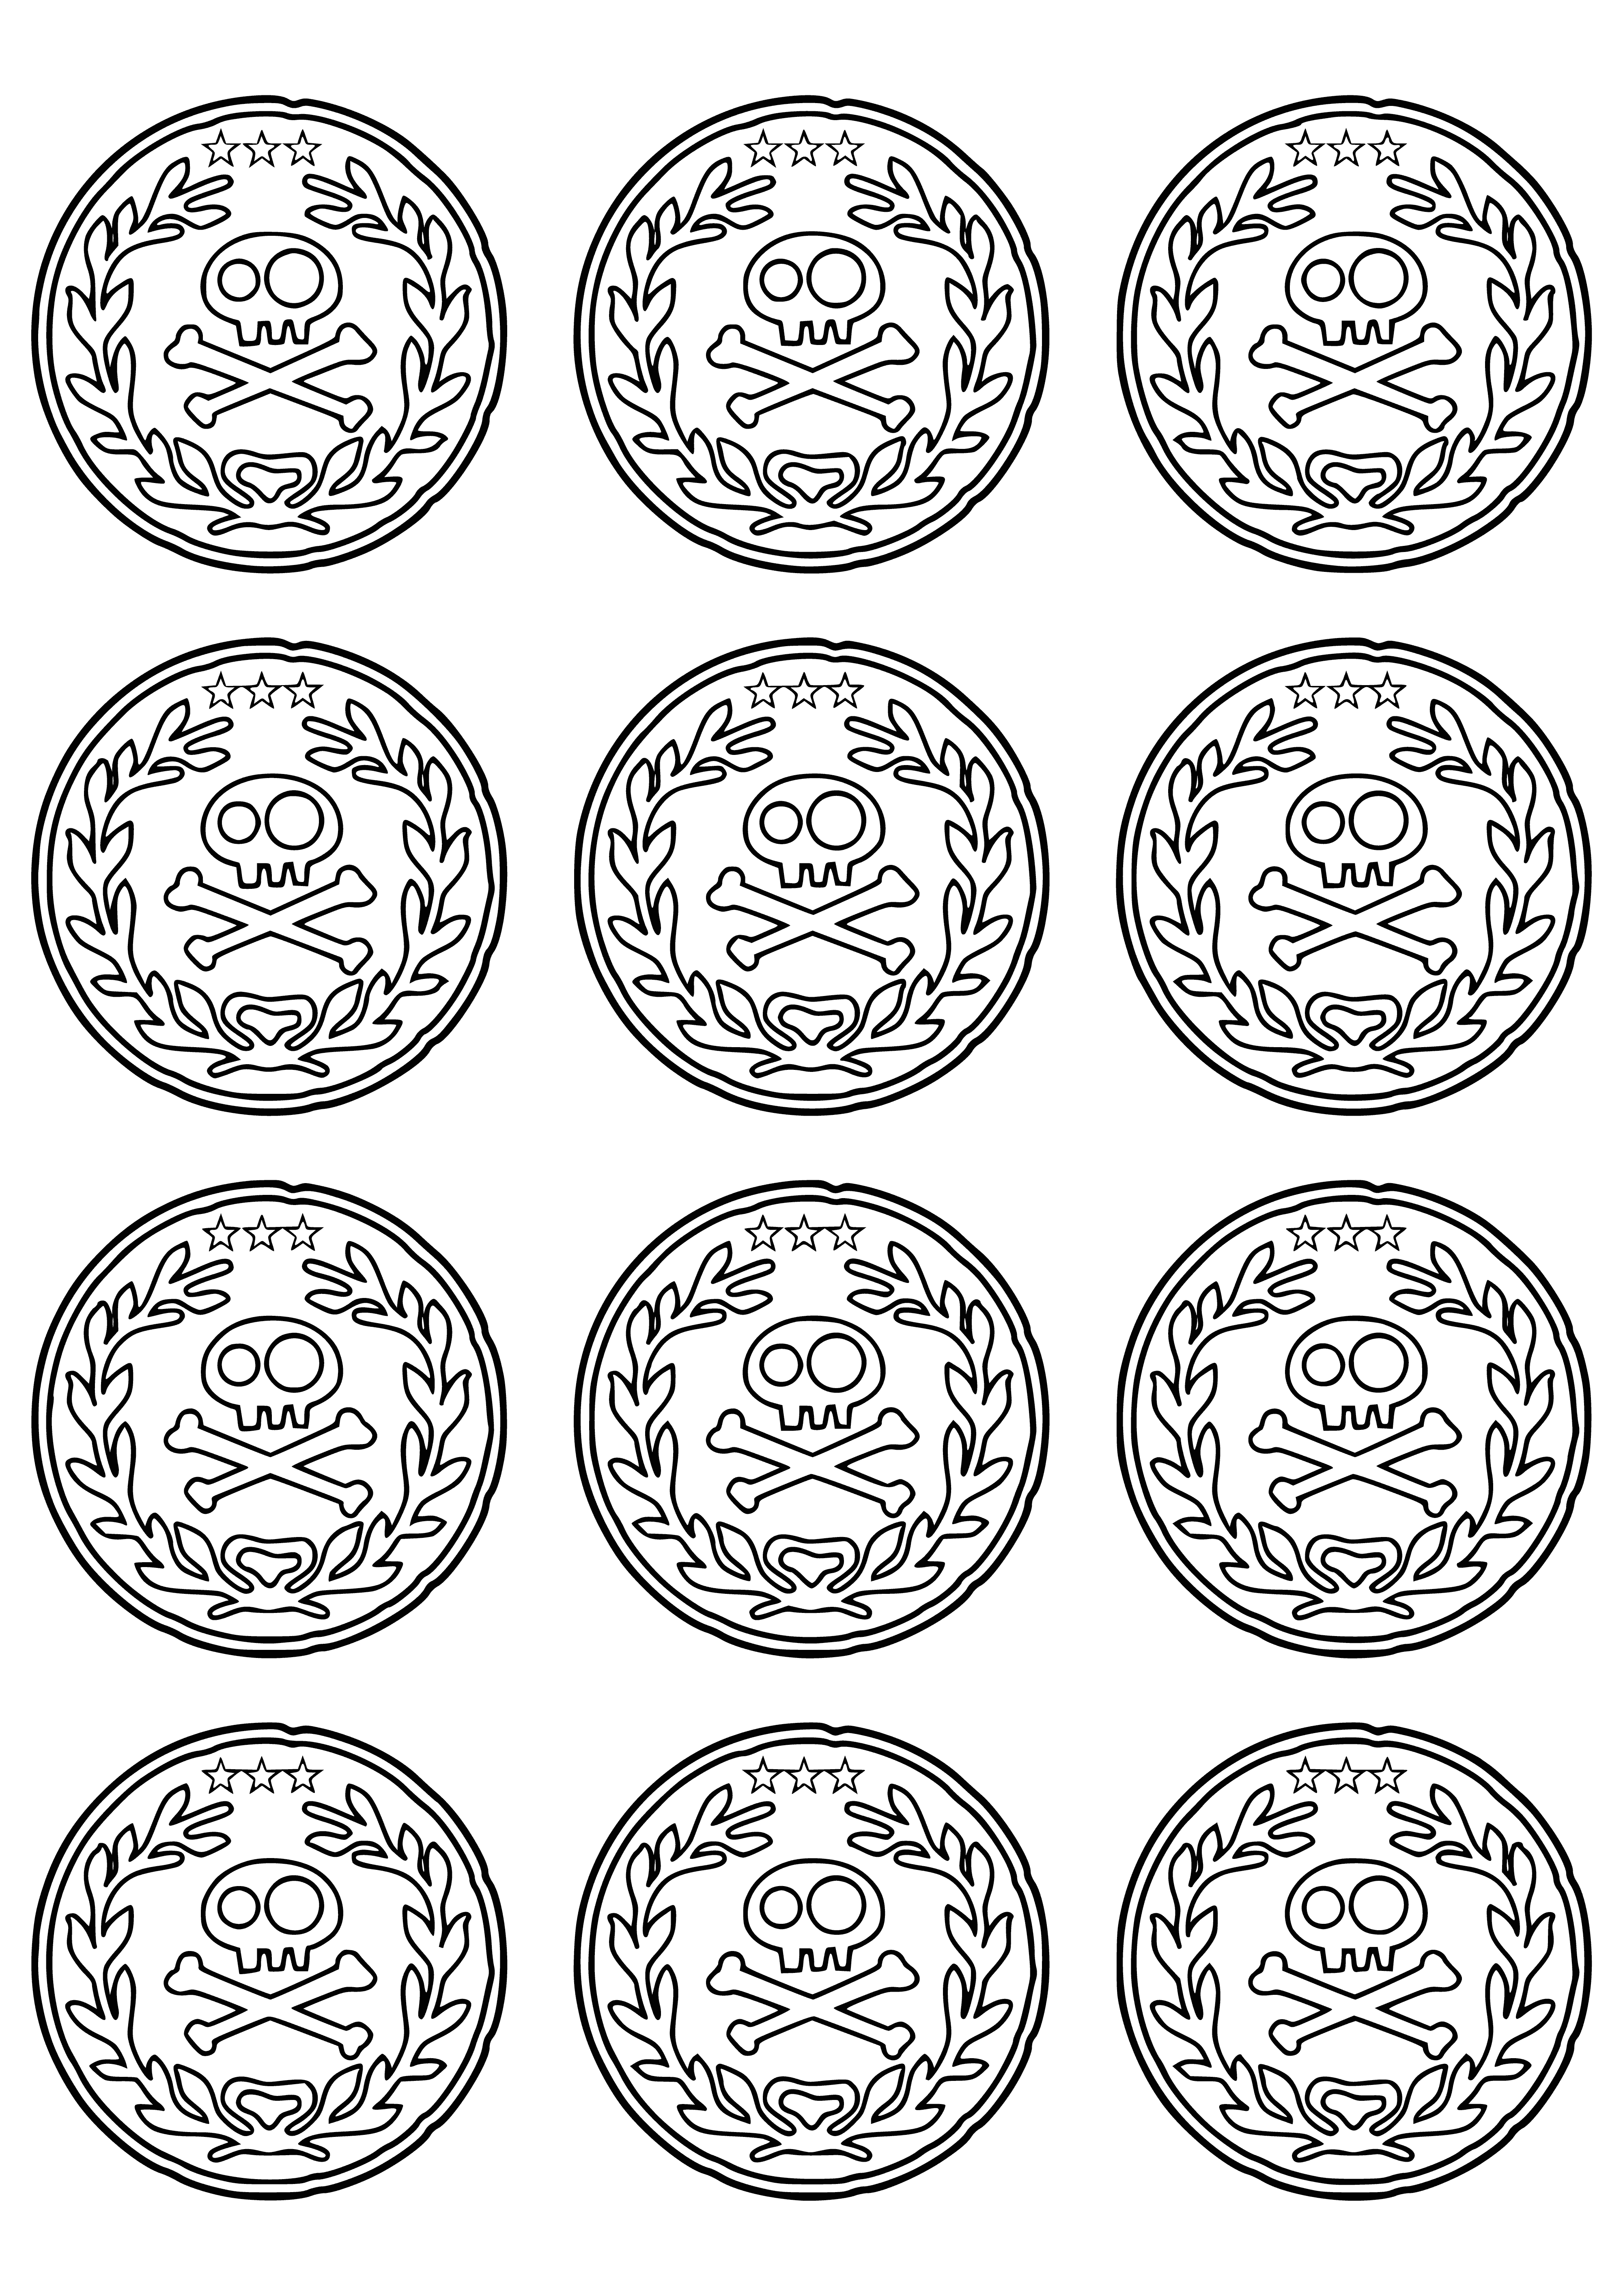 coloring page: Five golden coins in a circle, connected to a central skull, against a black background.